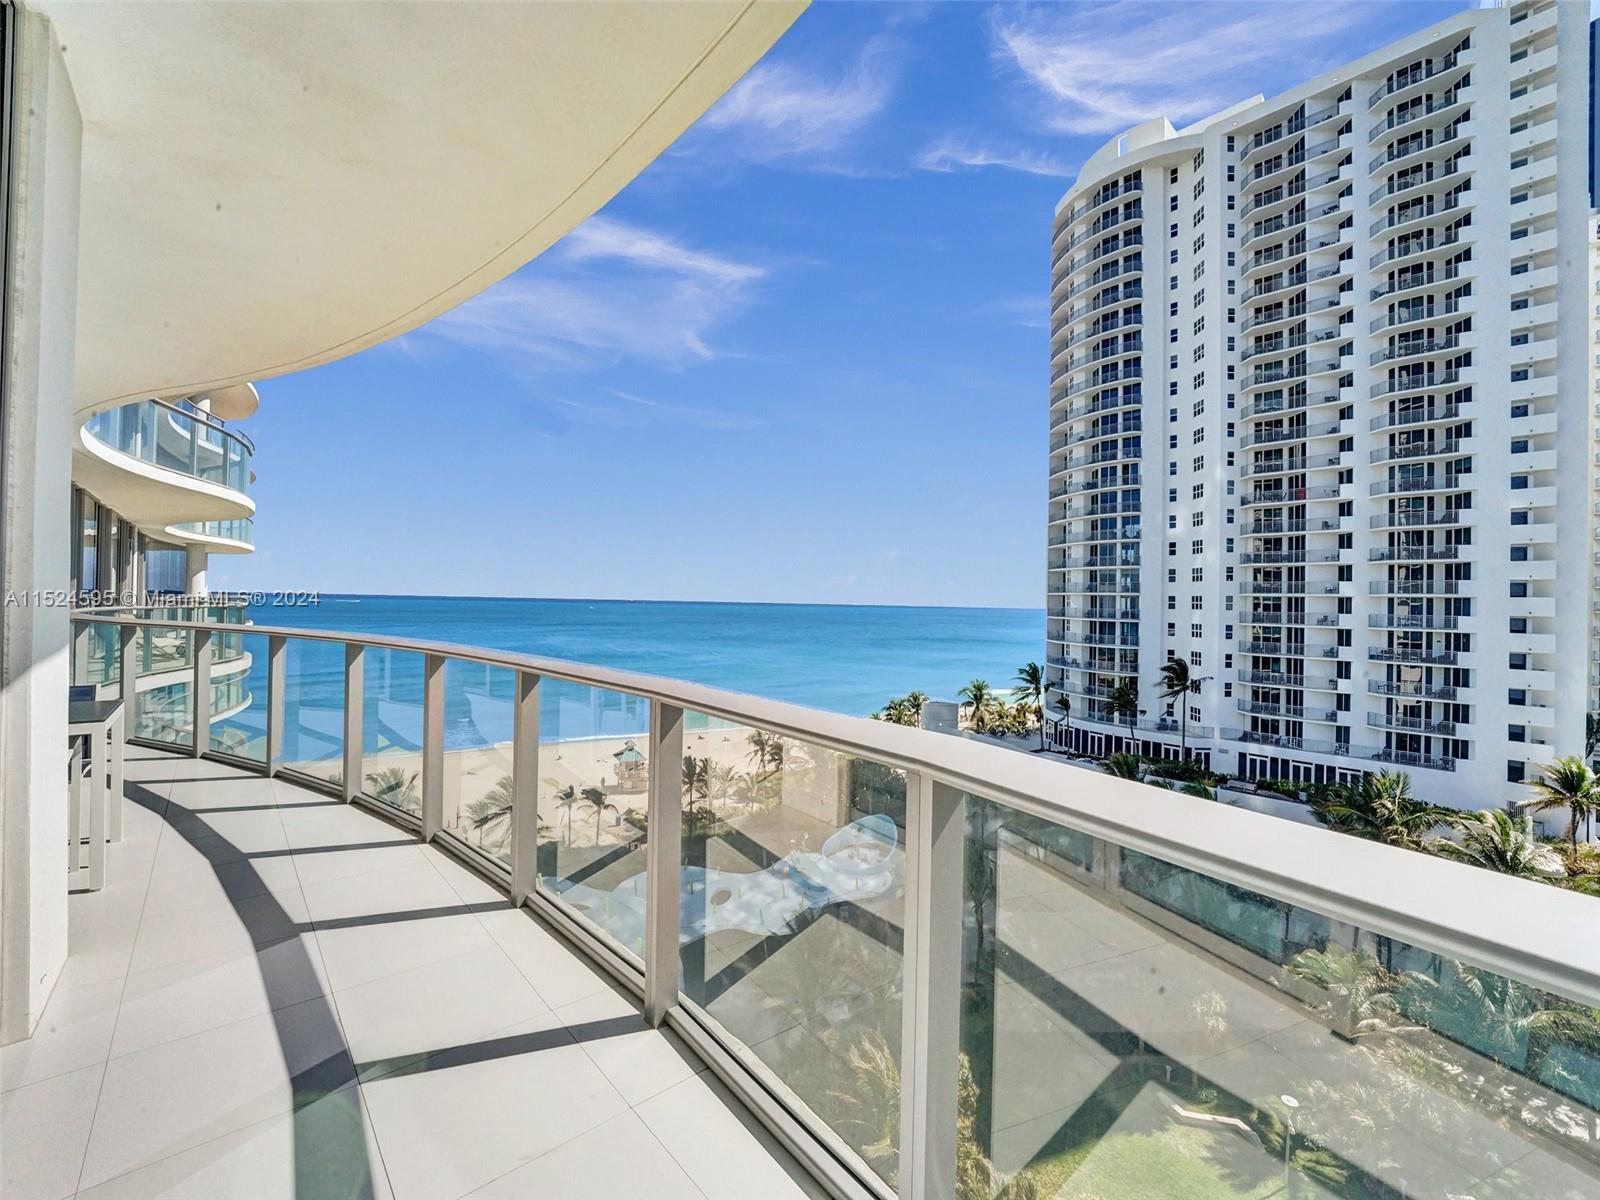 Exclusive opportunity at the Chateau beach Residences, Sunny Isles Beach FL. Fully furnished 2 bedroom+ den and 3 baths unit offers breathtaking views of the Atlantic Ocean, Intracoastal, and Miami skyline. High-end finishes, Miele and Subzero appliances, and exquisite lighting. Chateau Beach is not just a home; it's a lifestyle. Enjoy exclusive amenities like restaurant, spa, Cigar Bar w/ humidor boxes, and a Wine Lounge. Stay active in the ocean-view Fitness Center or unwind in the Home Theater, Massage room and hair salon for ultimate relaxation. Benefit from 24-hour concierge and valet services. Kids playroom. Live in a residence that defines elegance and sophistication. Welcome to a world where luxury is limitless, and every detail speaks to the art of living well.